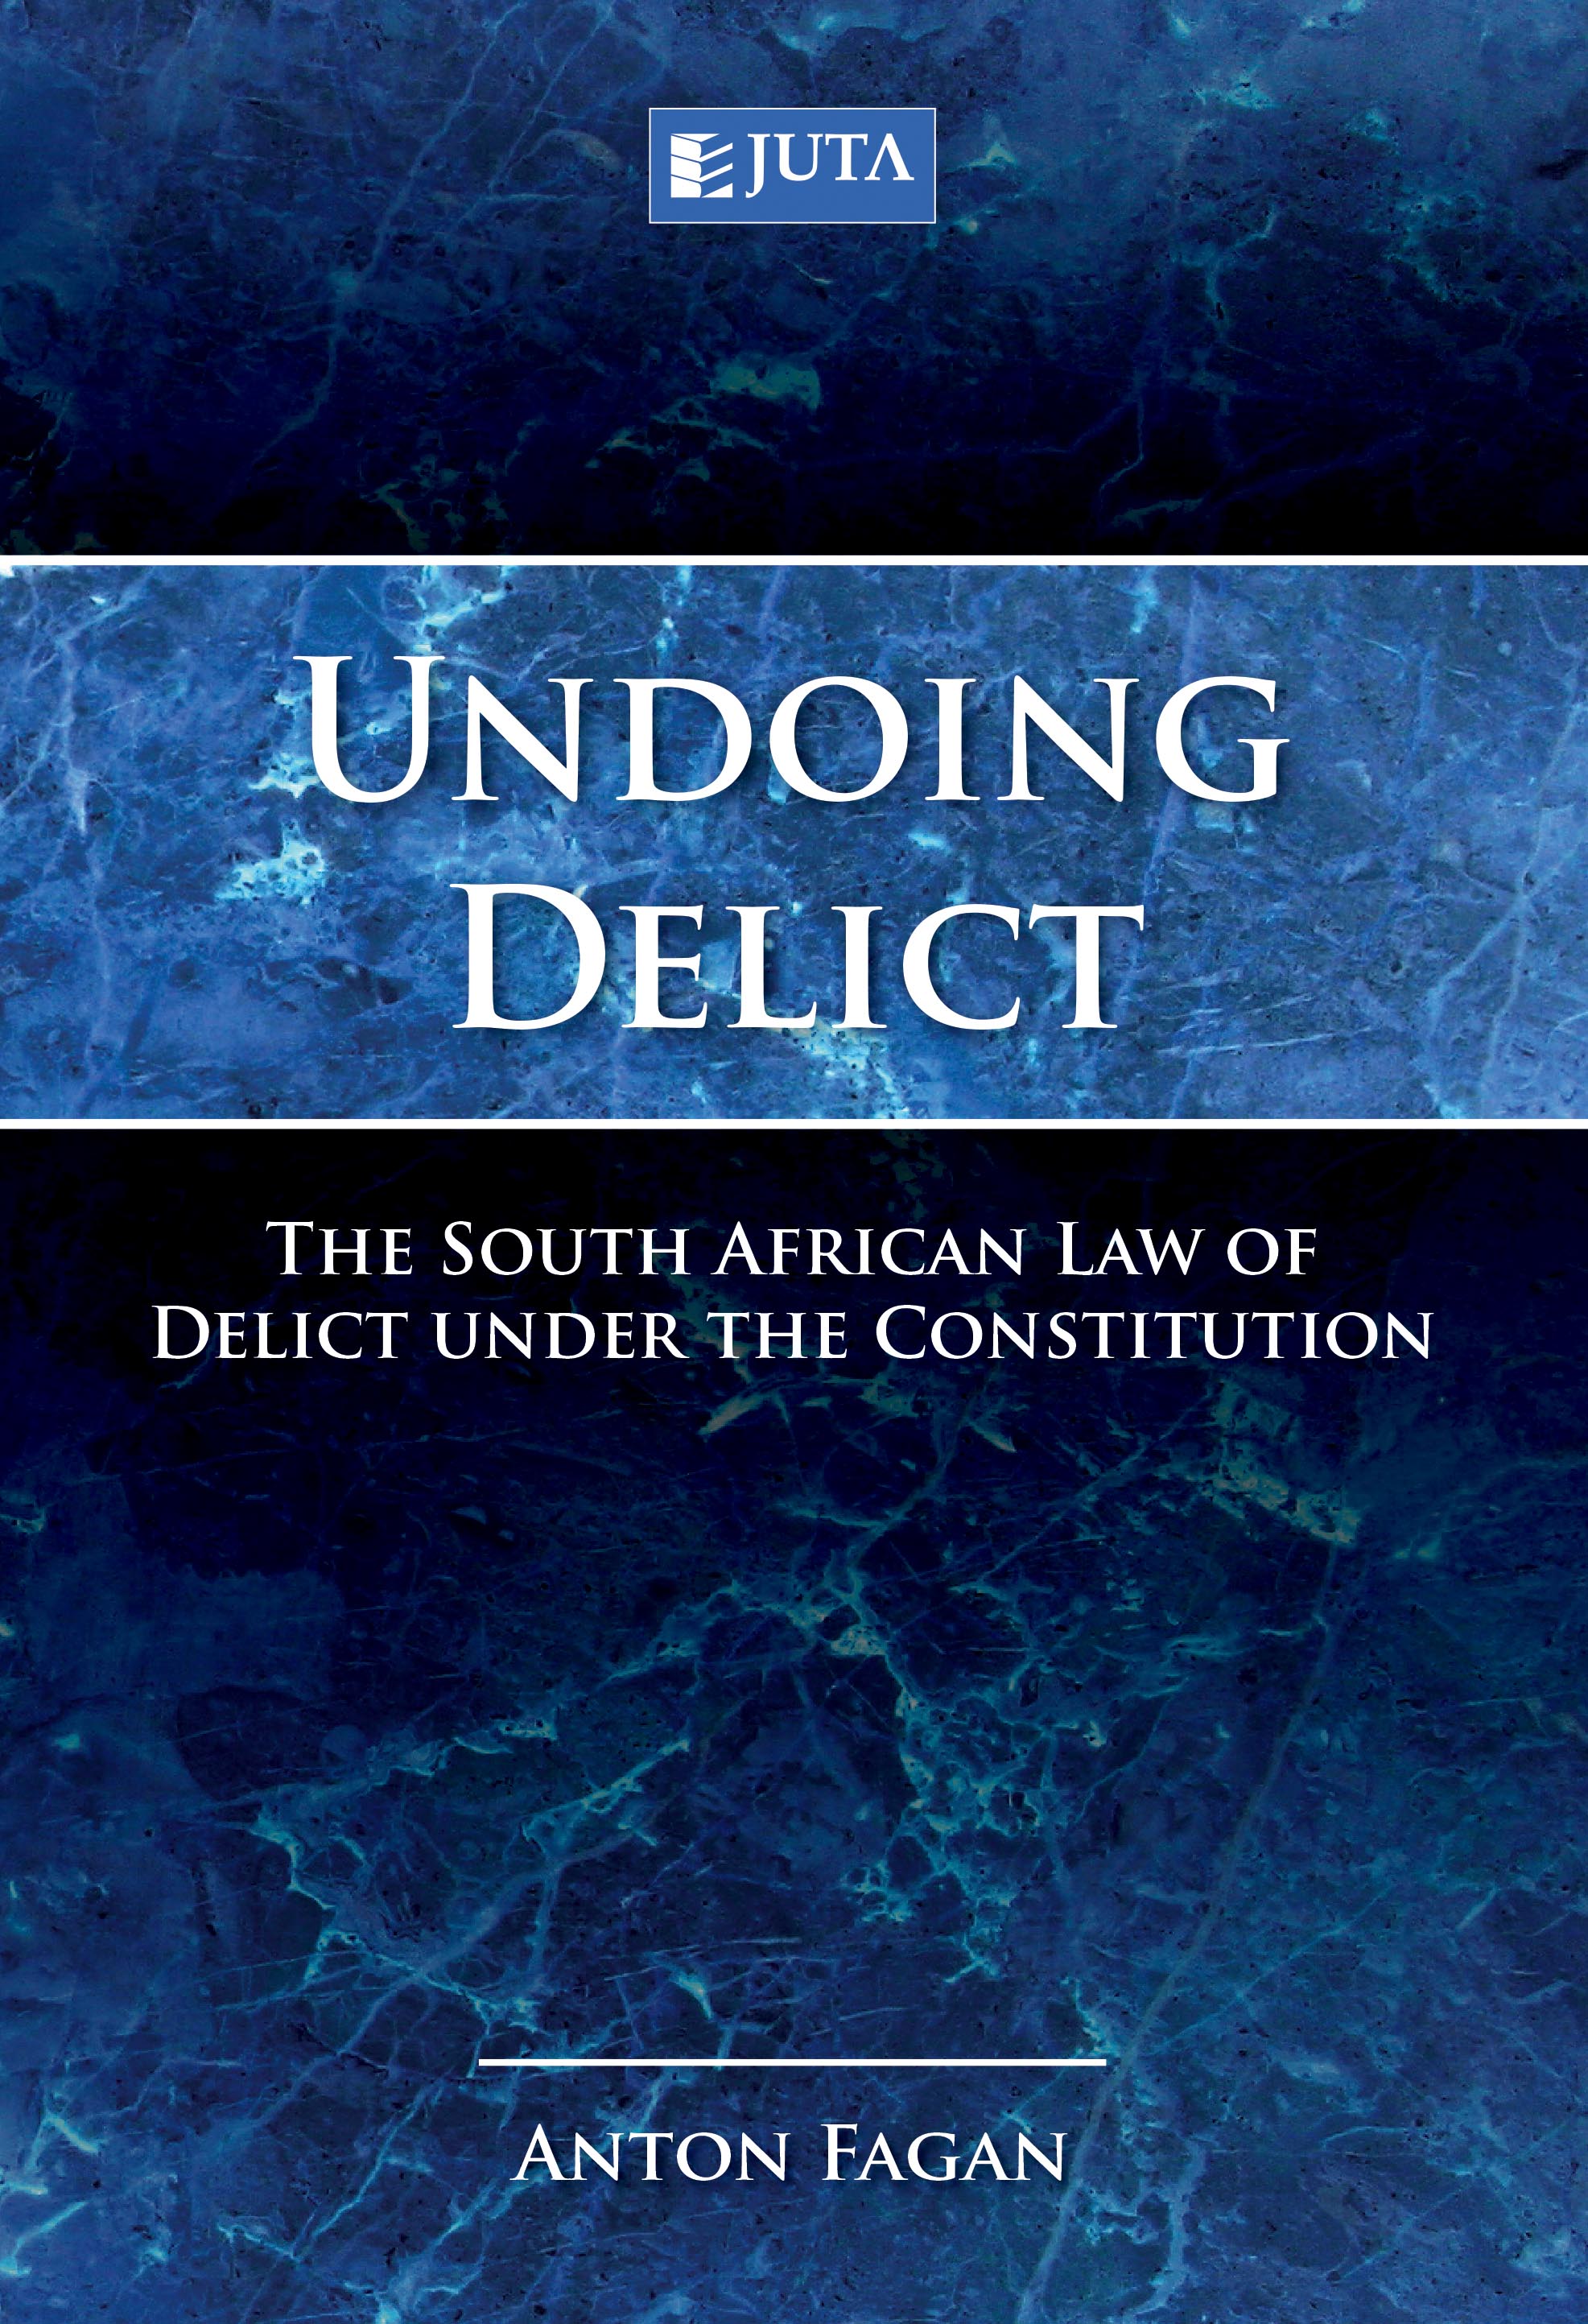 Undoing Delict: The South African Law of Delict under the Constitution